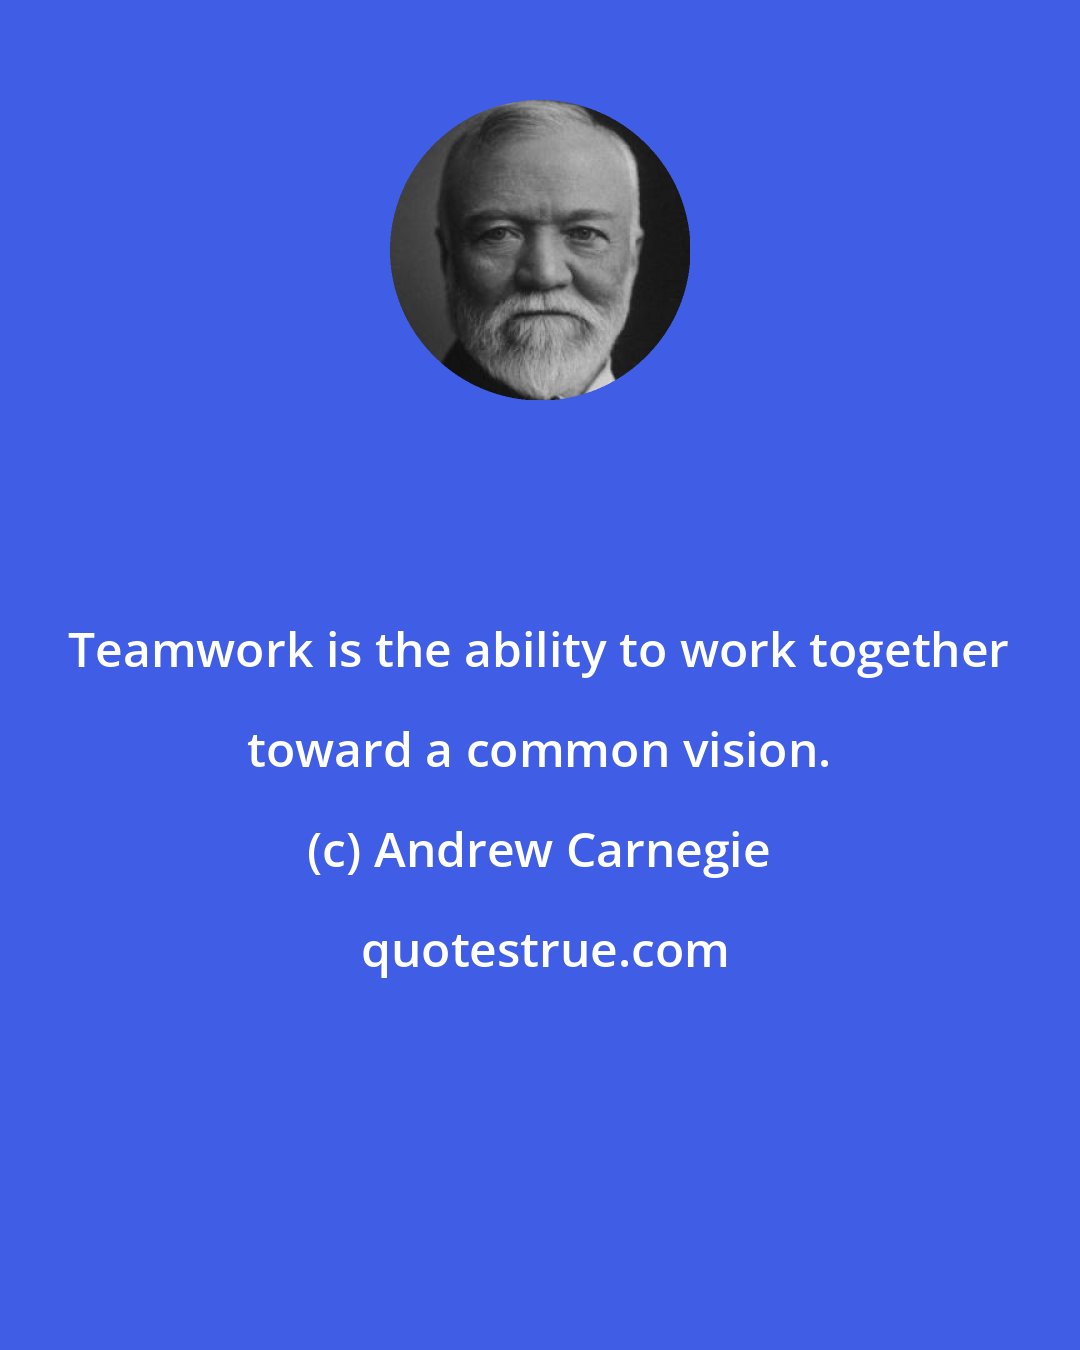 Andrew Carnegie: Teamwork is the ability to work together toward a common vision.